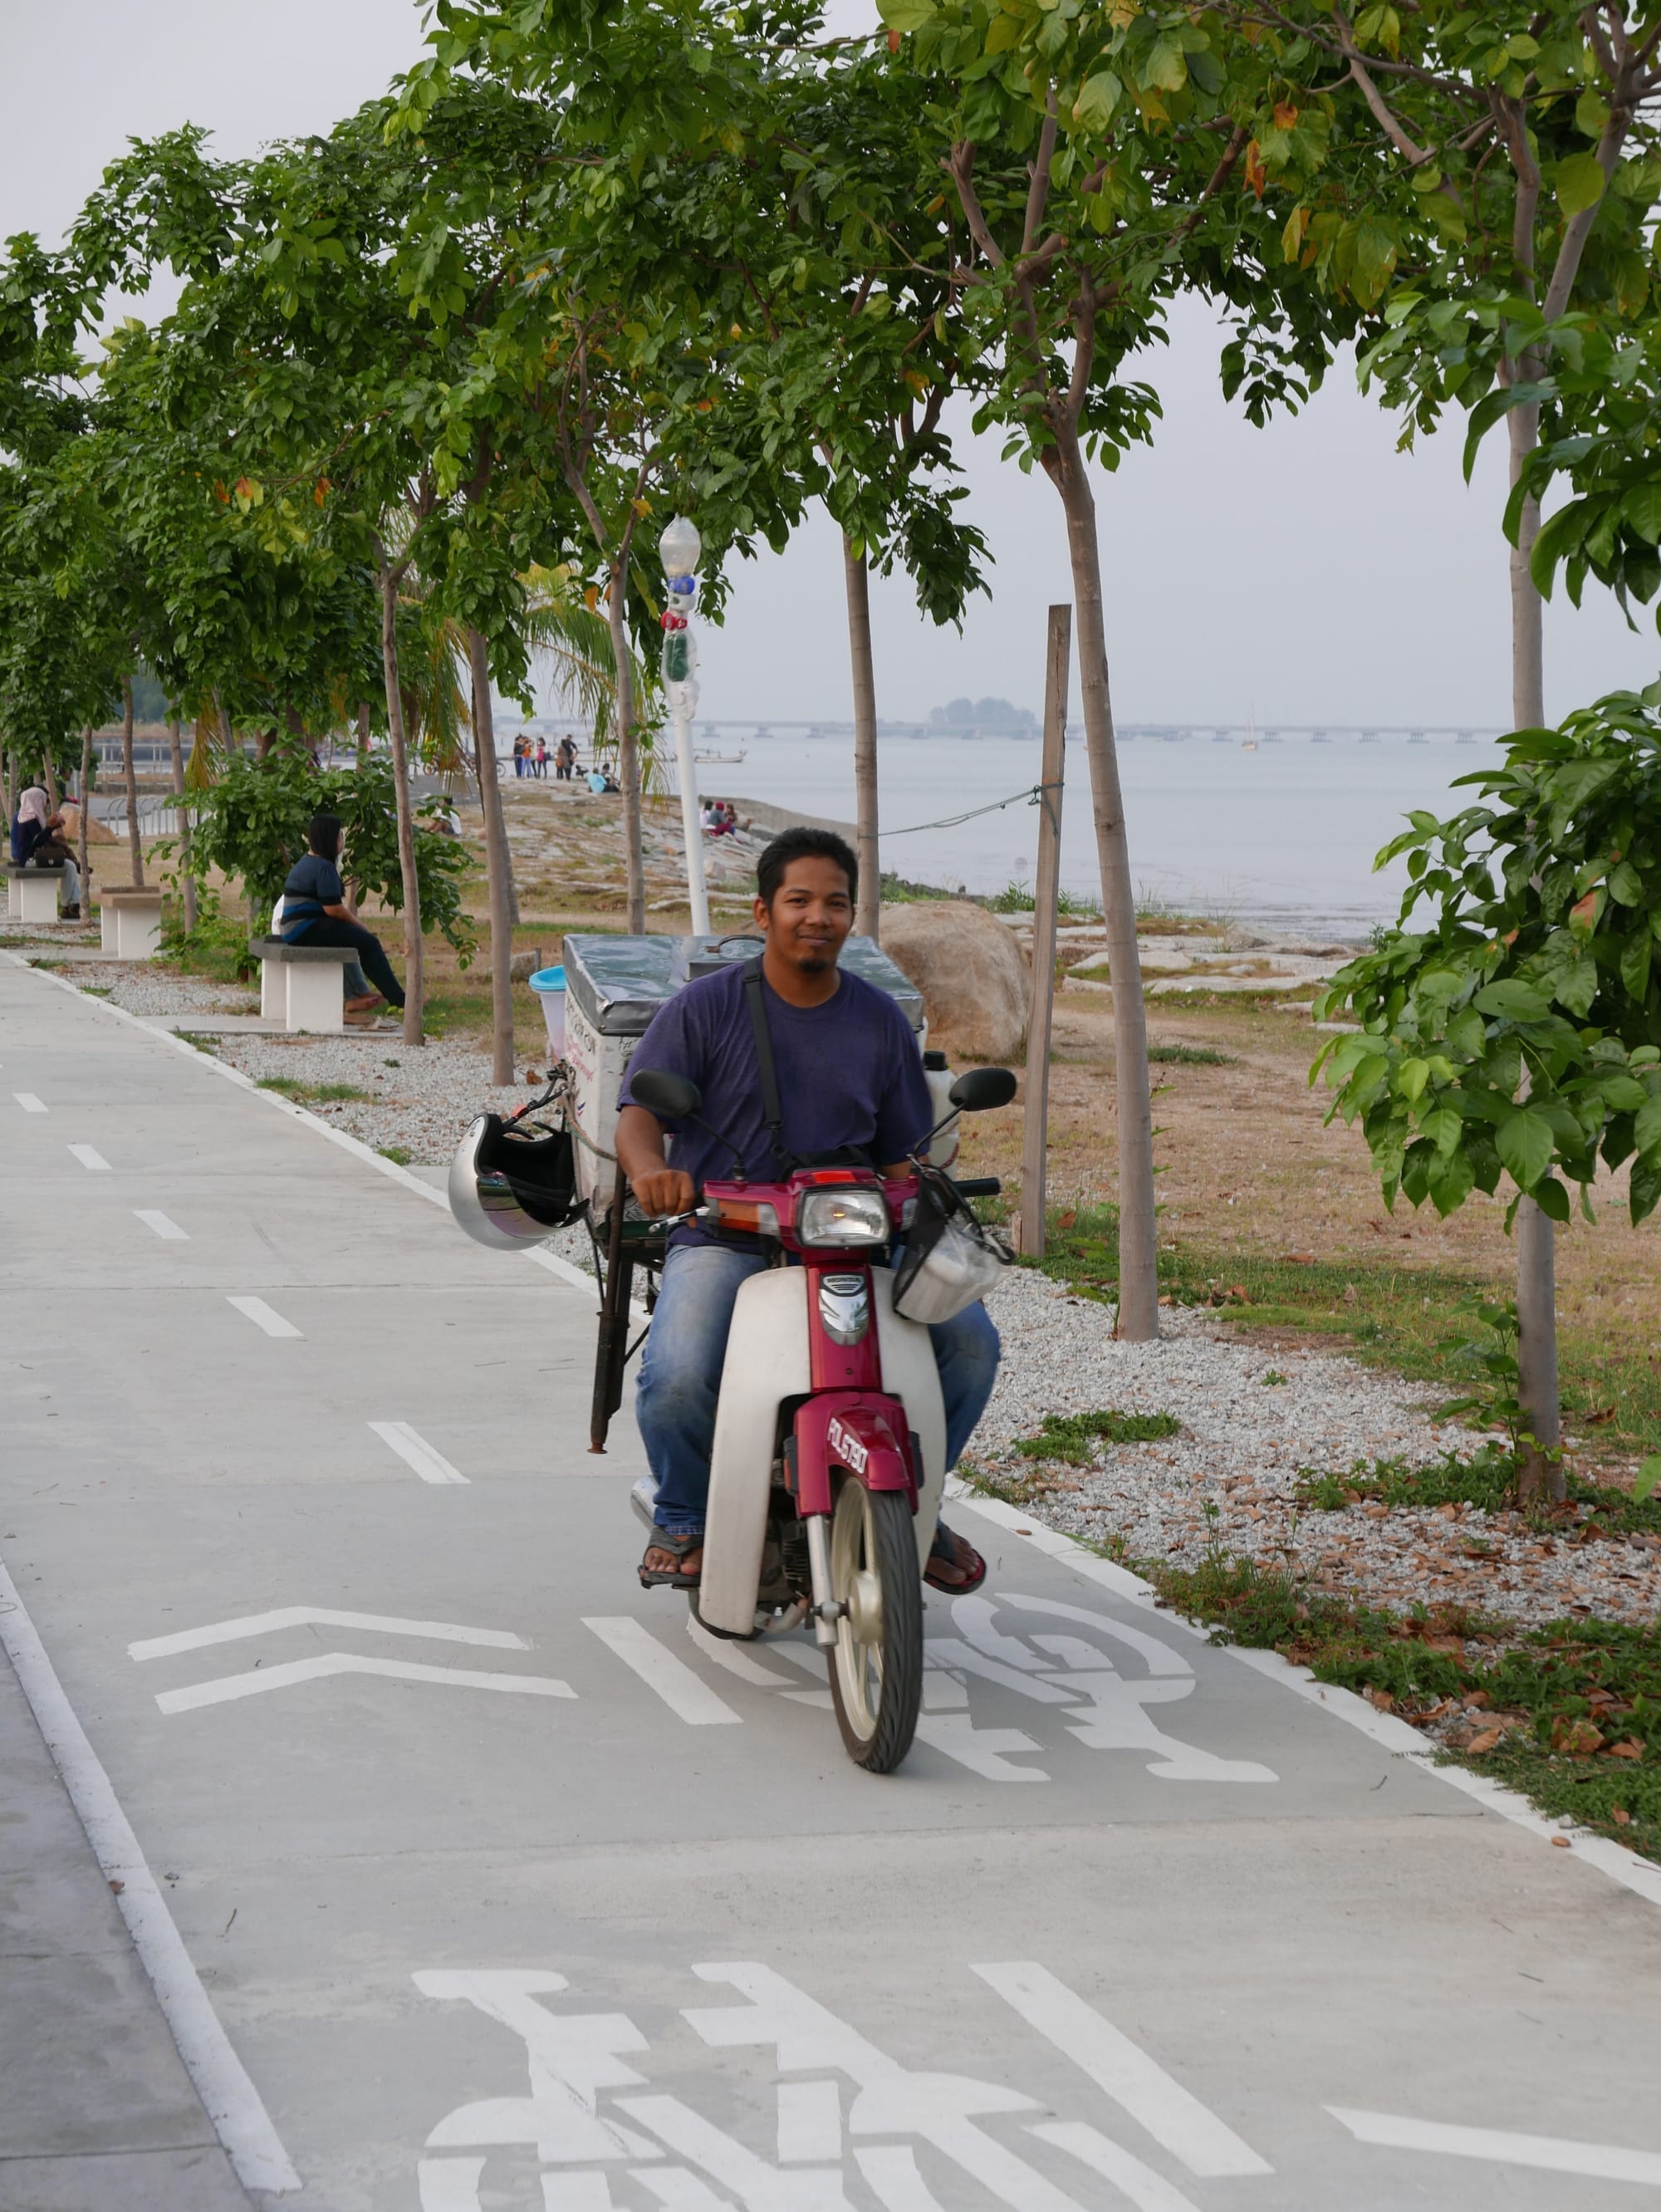 Photo by Author — motorbike ice-cream seller — Queensbay Seaside, Bayan Lepas, Penang, Malaysia